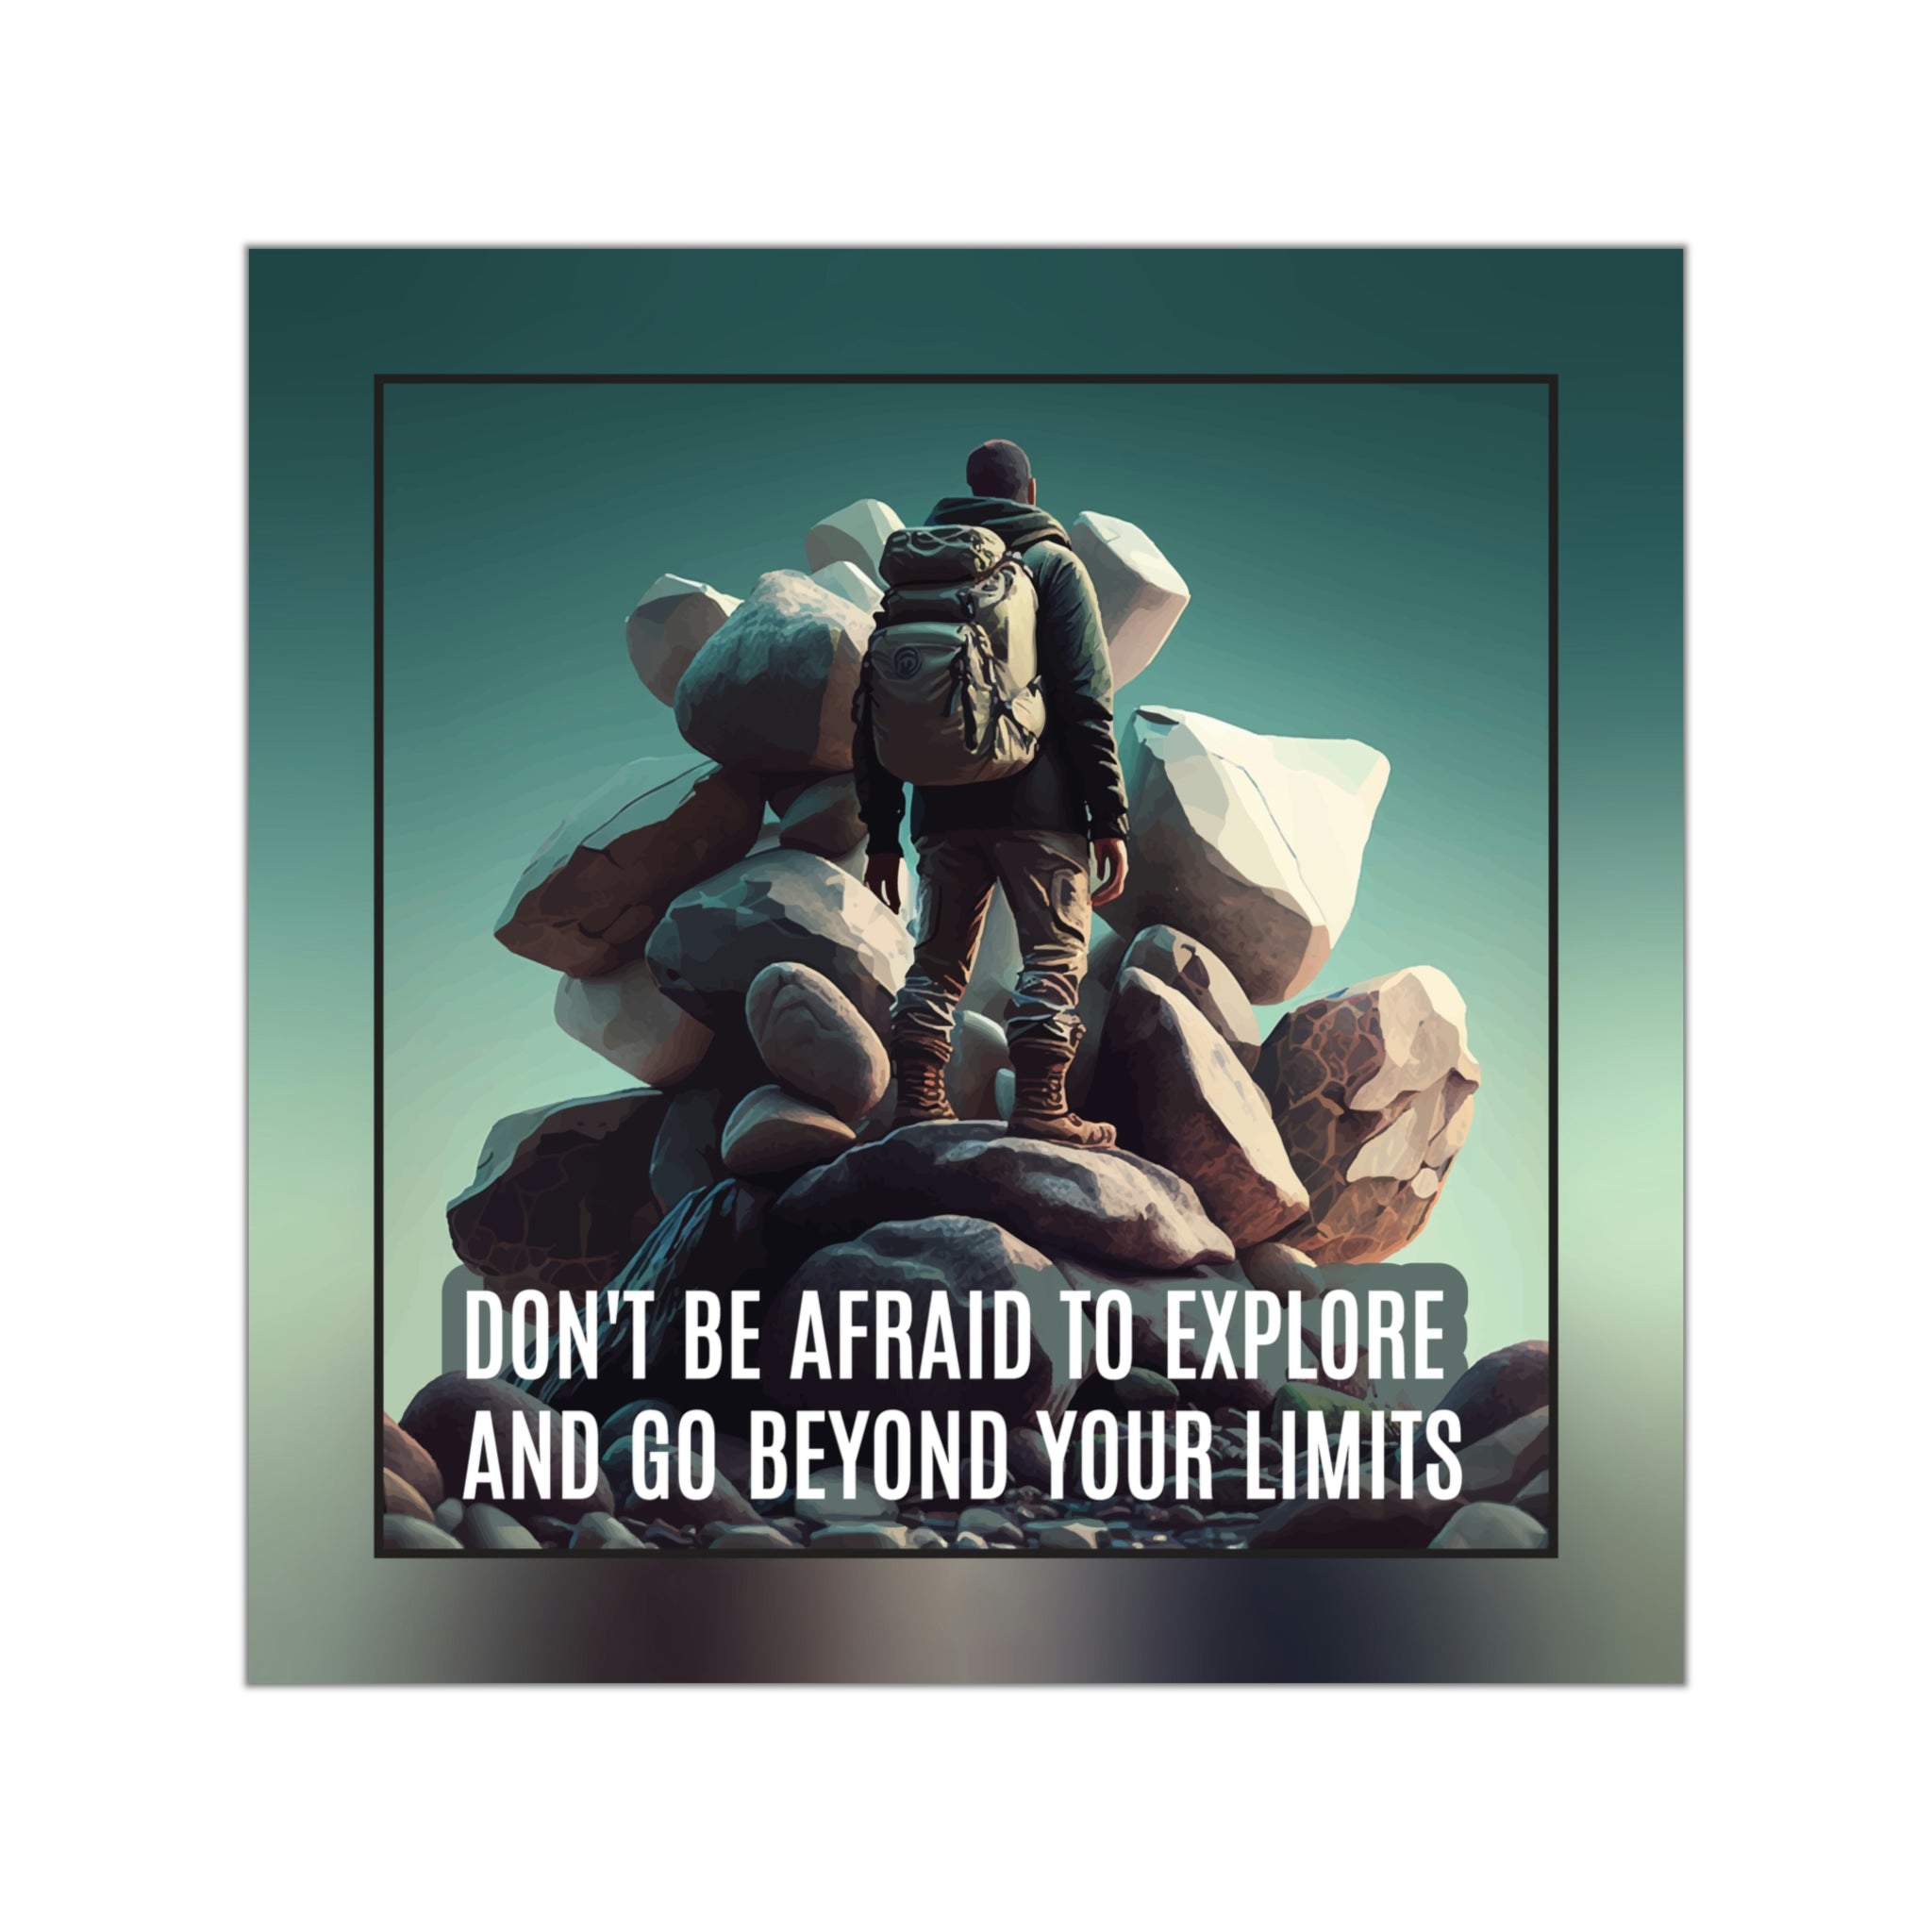 Motivational Square Sticker: Don't be Afraid to Explore Beyond Limits #size_5x5-inches